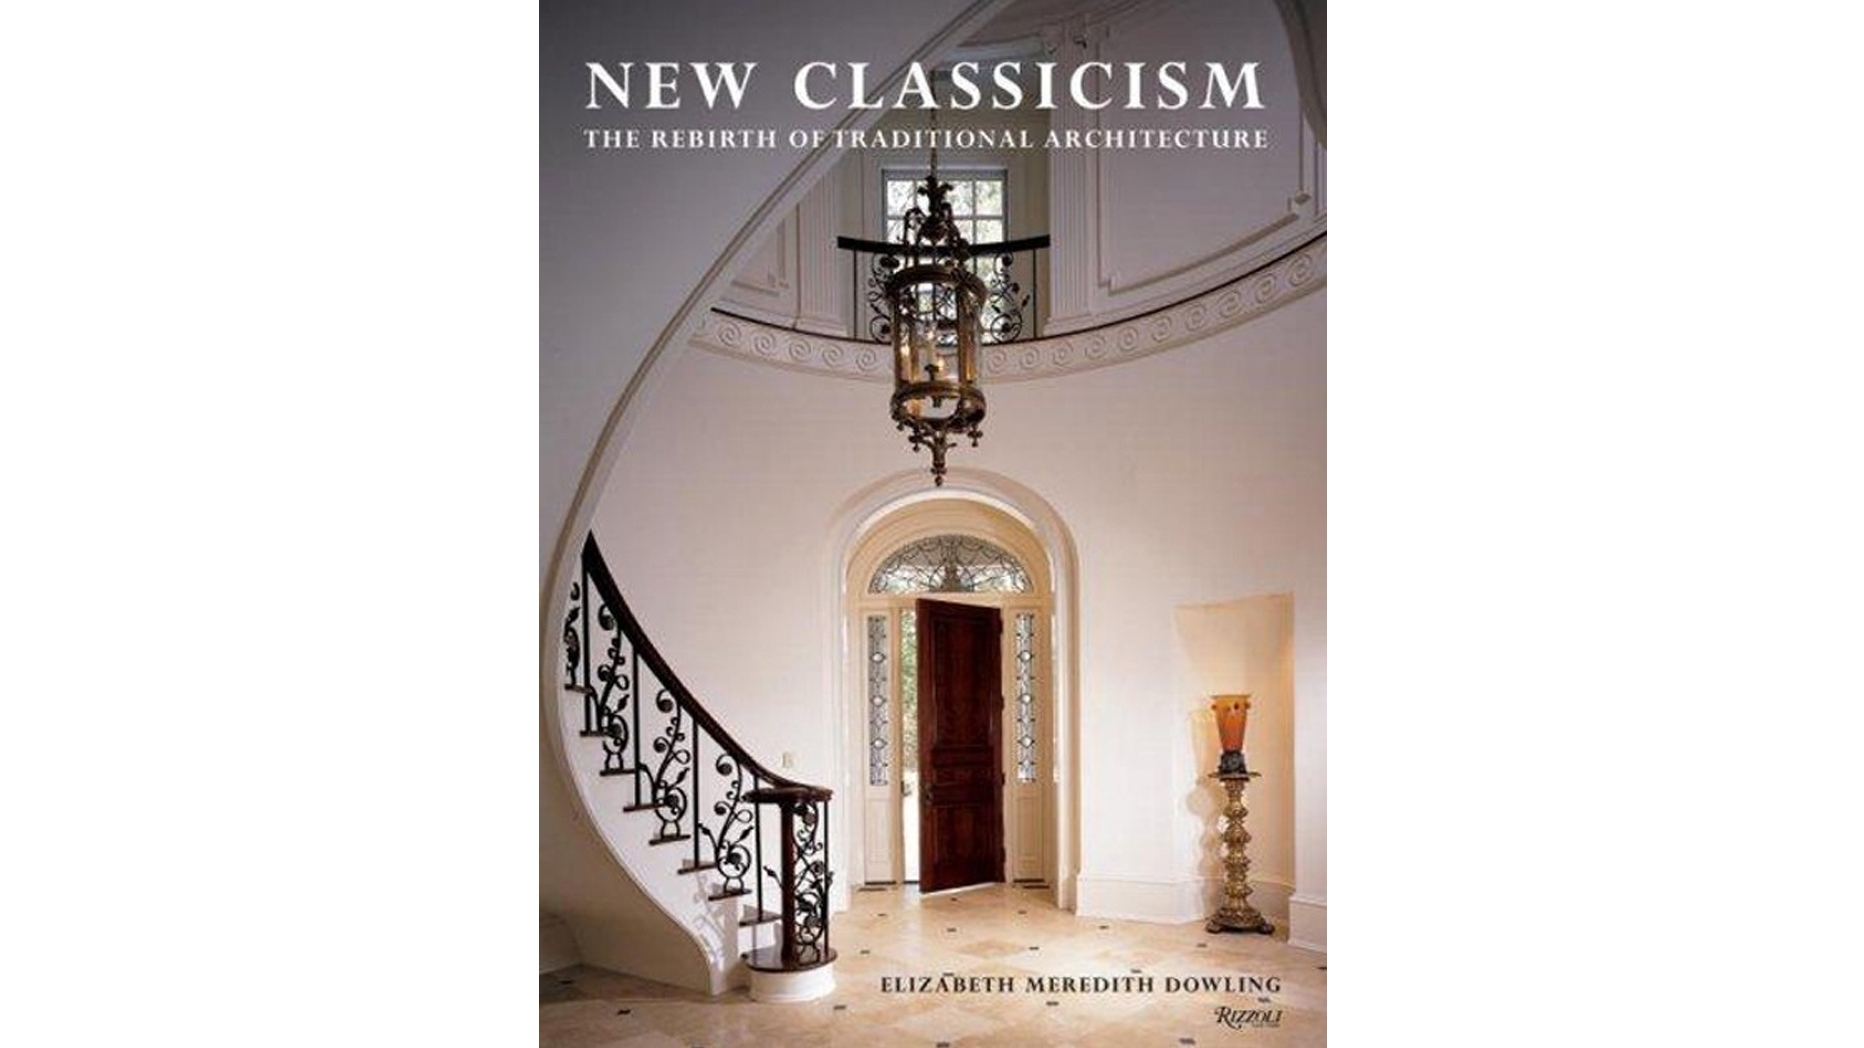 New Classicism book cover